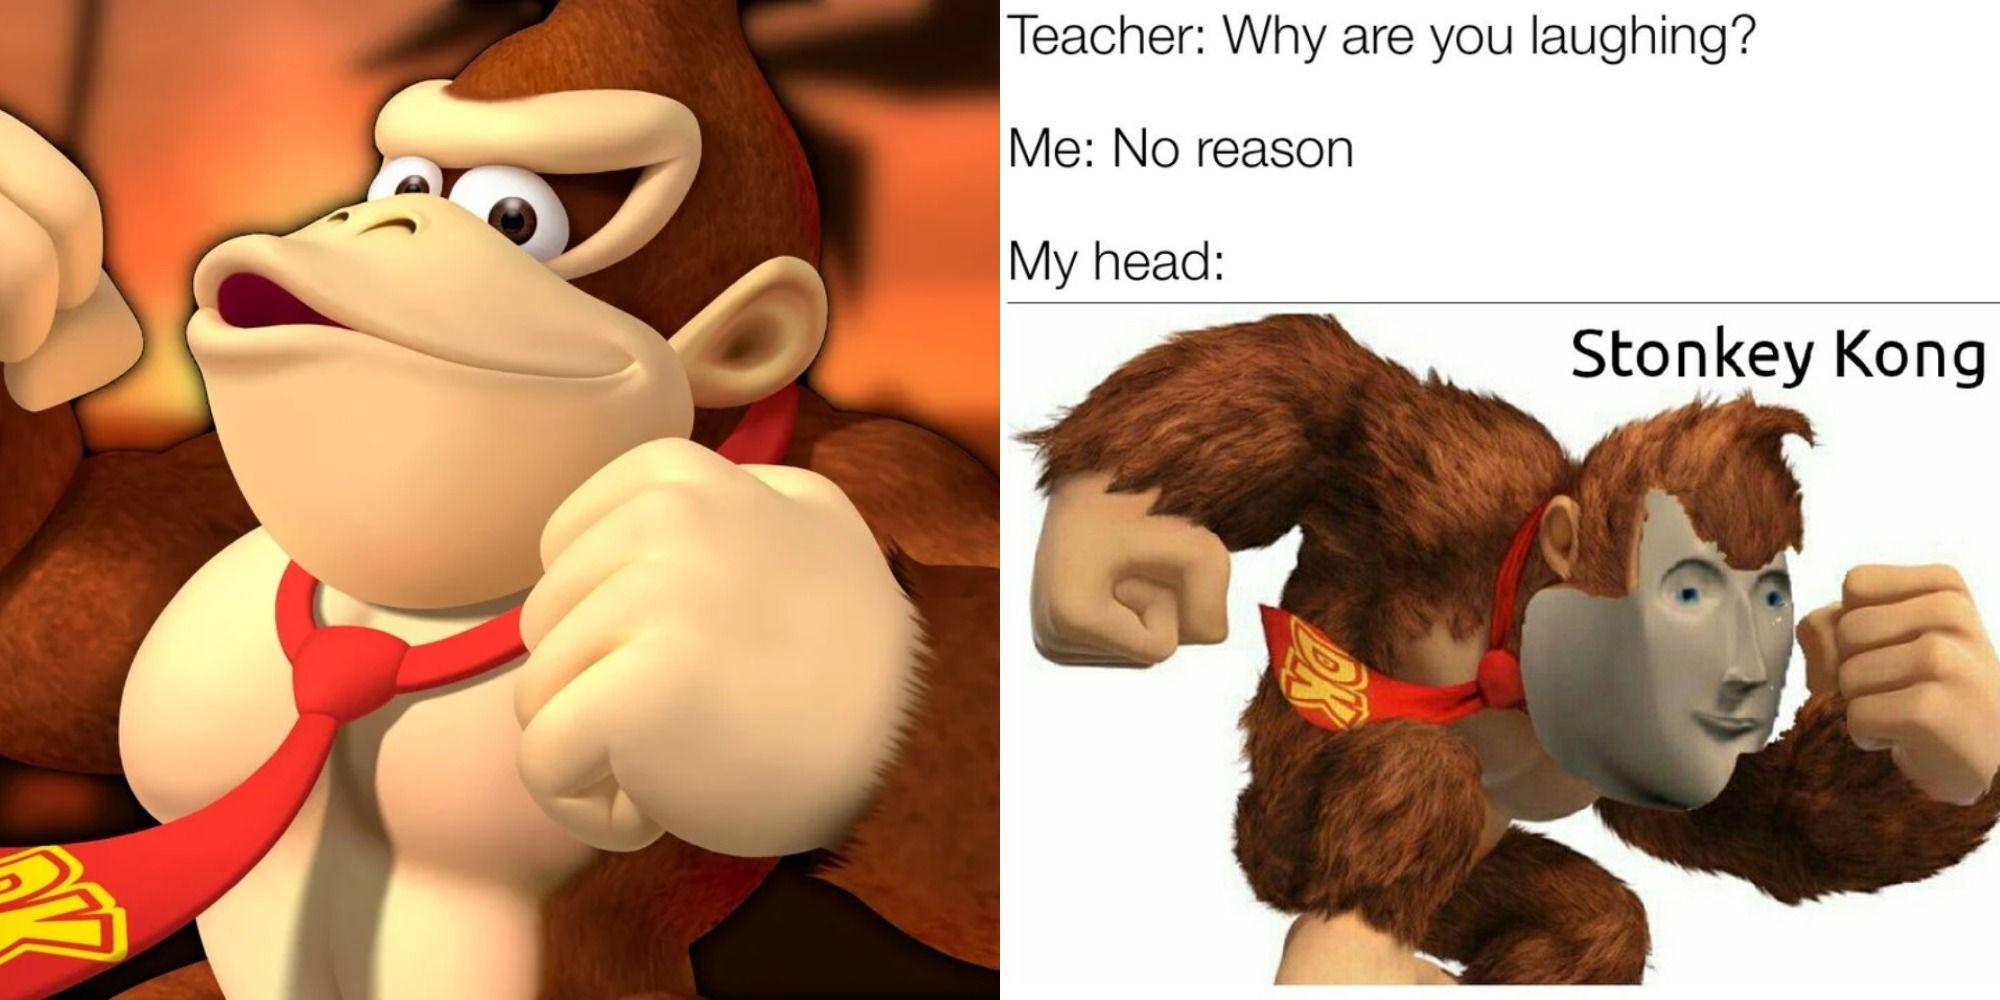 Split image showing Donkey Kong and a meme about him.